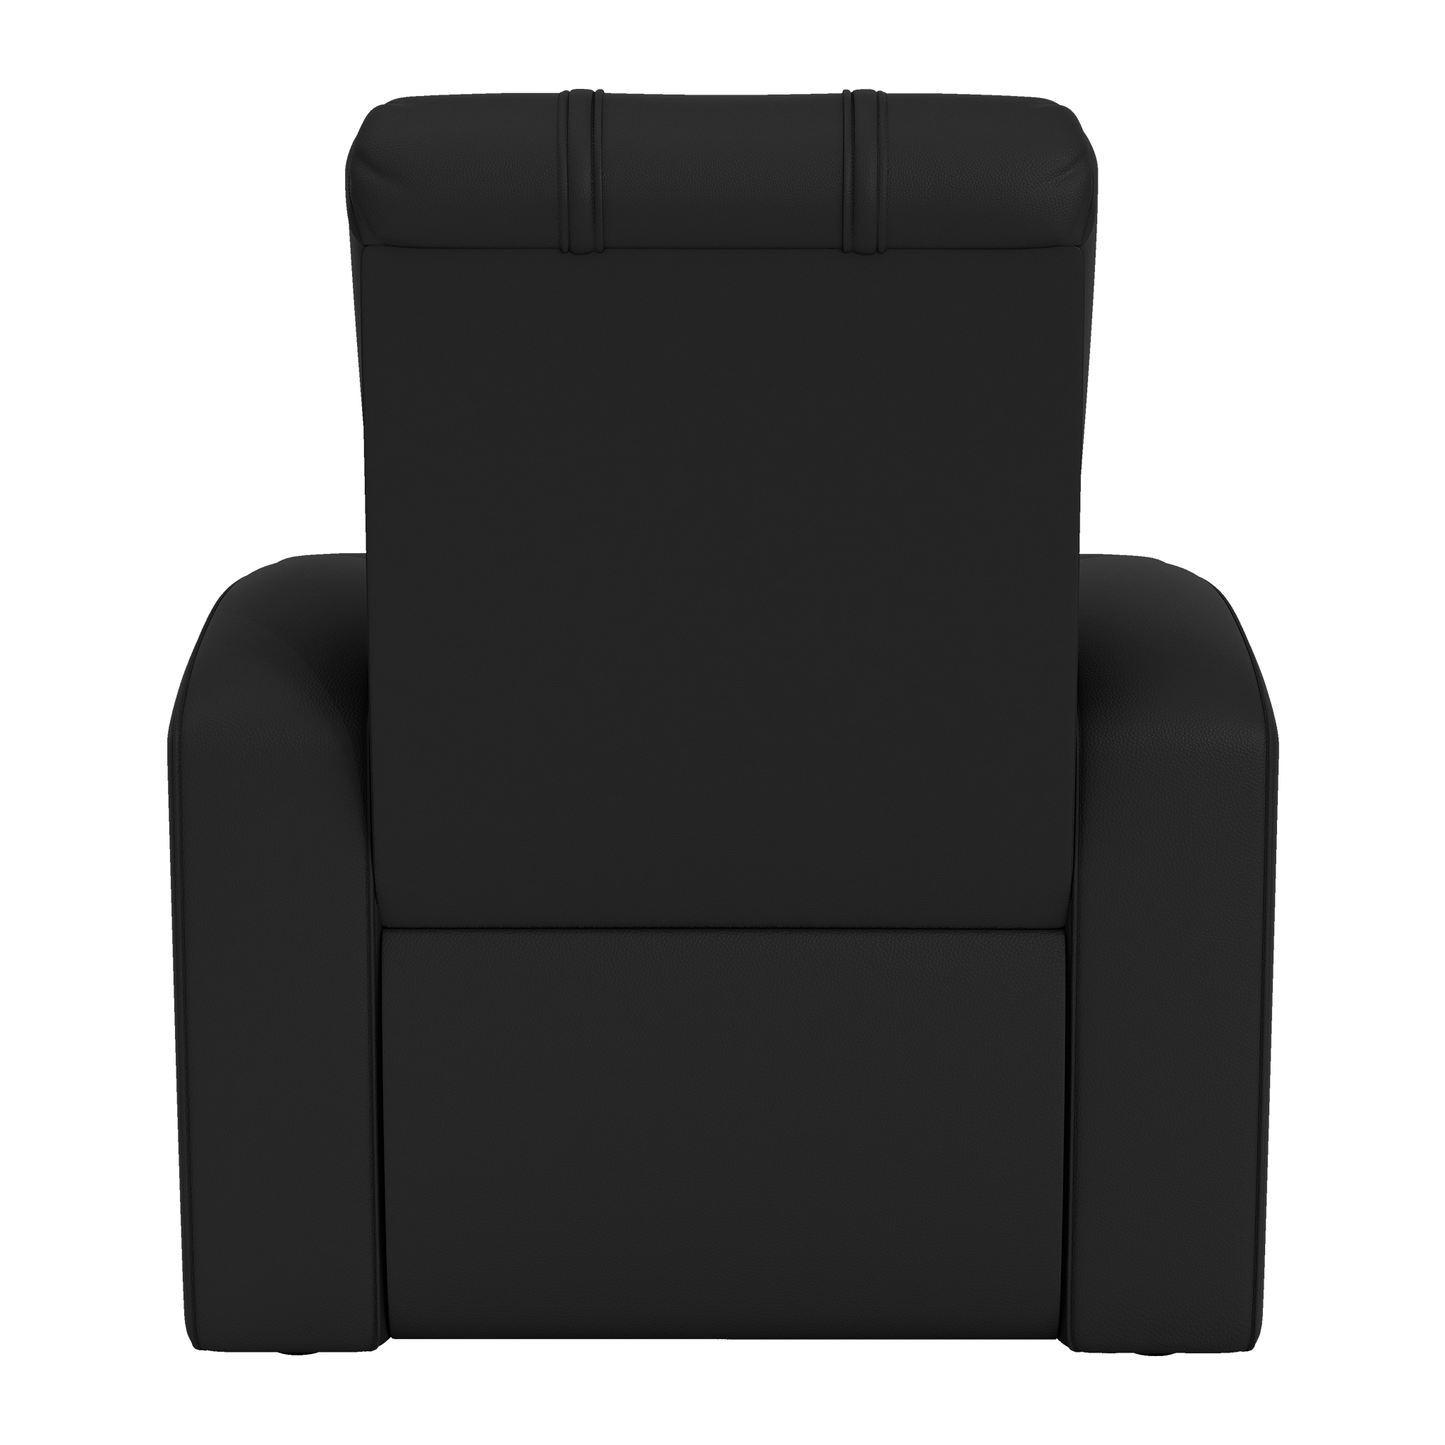 Relax Home Theater Recliner with Utah Utes Logo